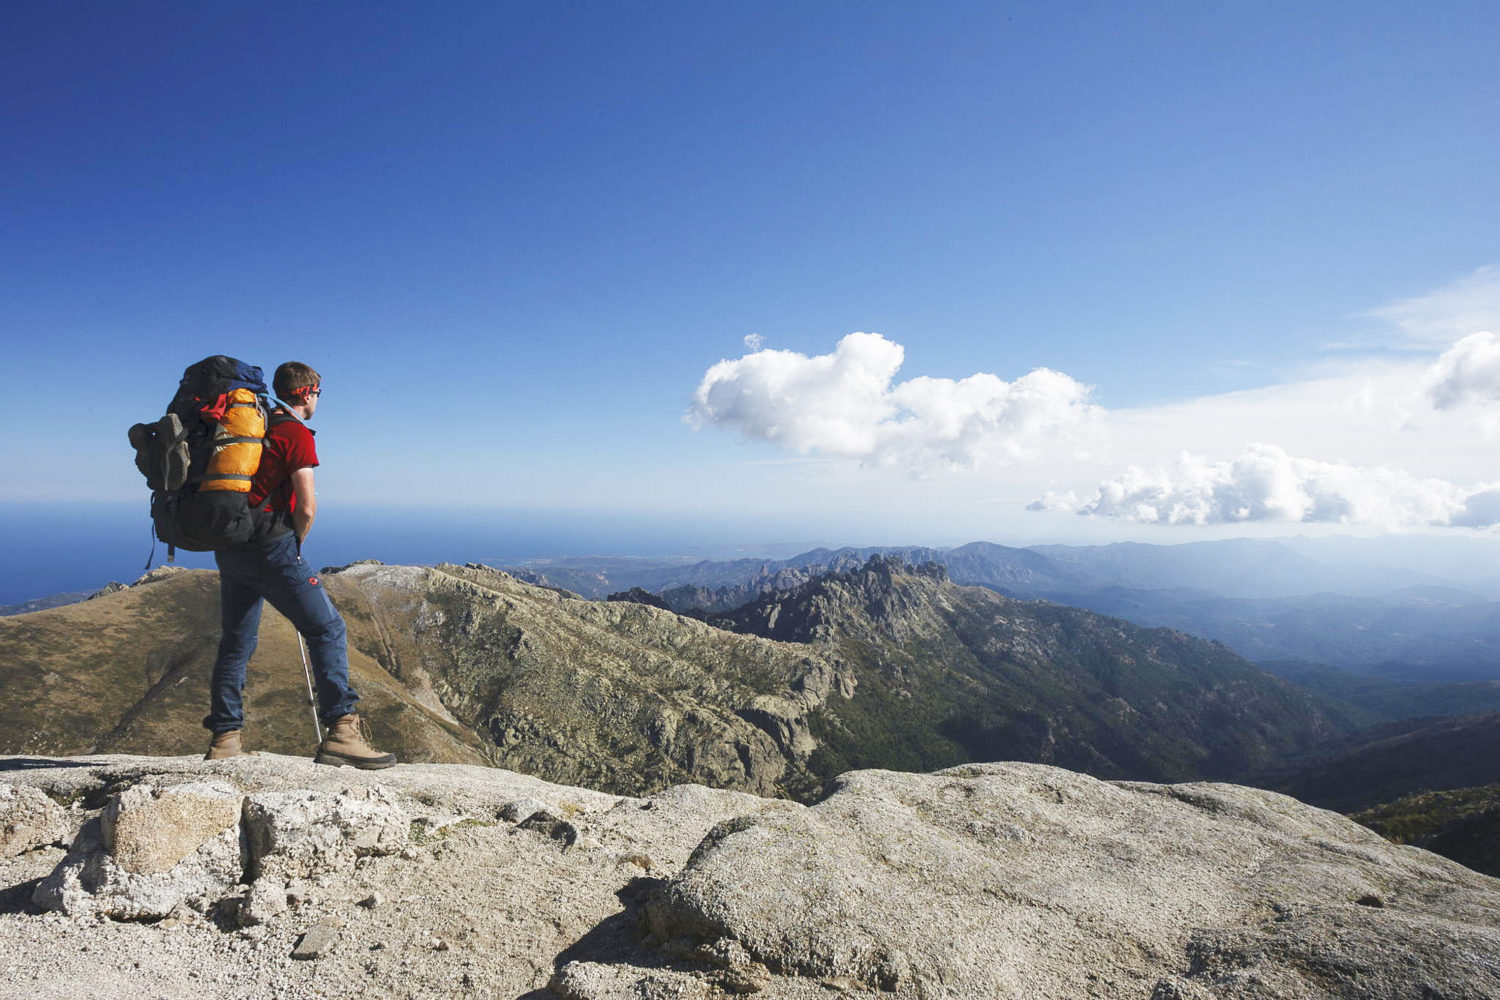 Stage 13 of the famous trekking route GR20 on Corsica is a long day from Refuge d'Usciolu to Refuge d'Asiano with a climb on top of the highest mountain in the south of Corsica, Monte Incudine.